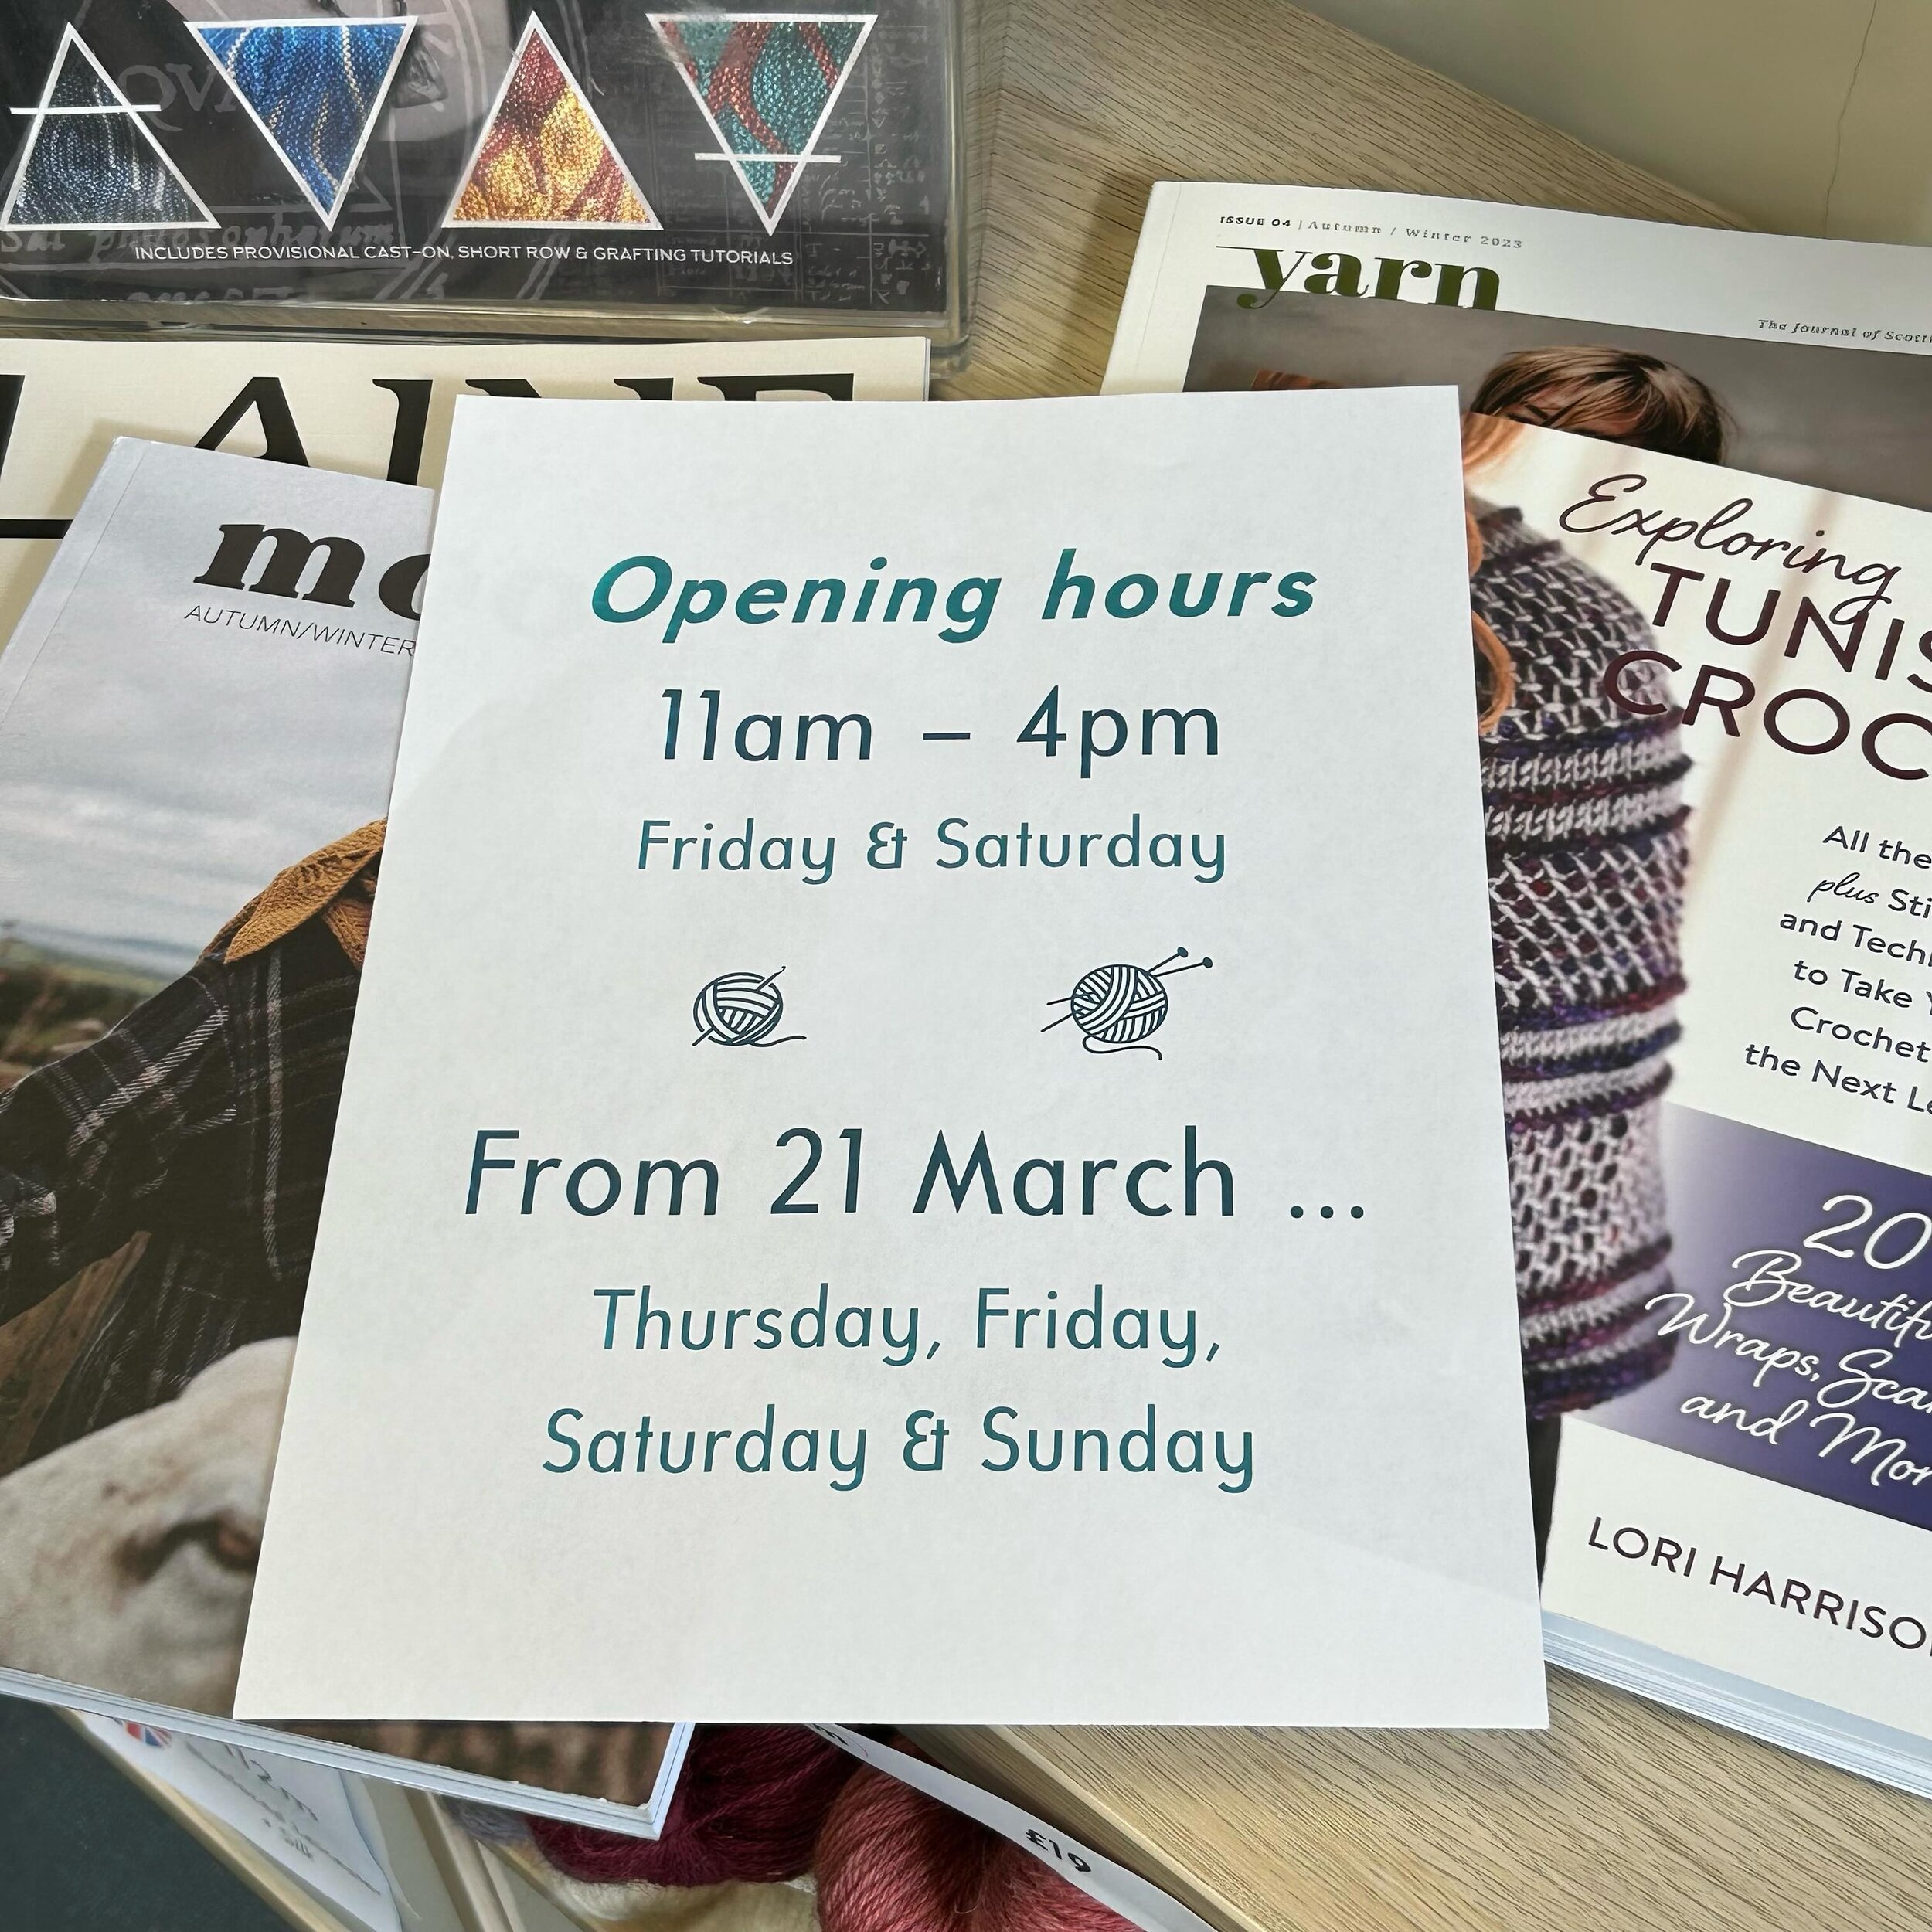 The team has discussed and made a decision! From 21st March, we&rsquo;ll go back to our previous opening hours of Thursday to Sunday.

Until then, it will stay as just Friday and Saturday.

(Mainly because I STILL need to lock myself in the very diso